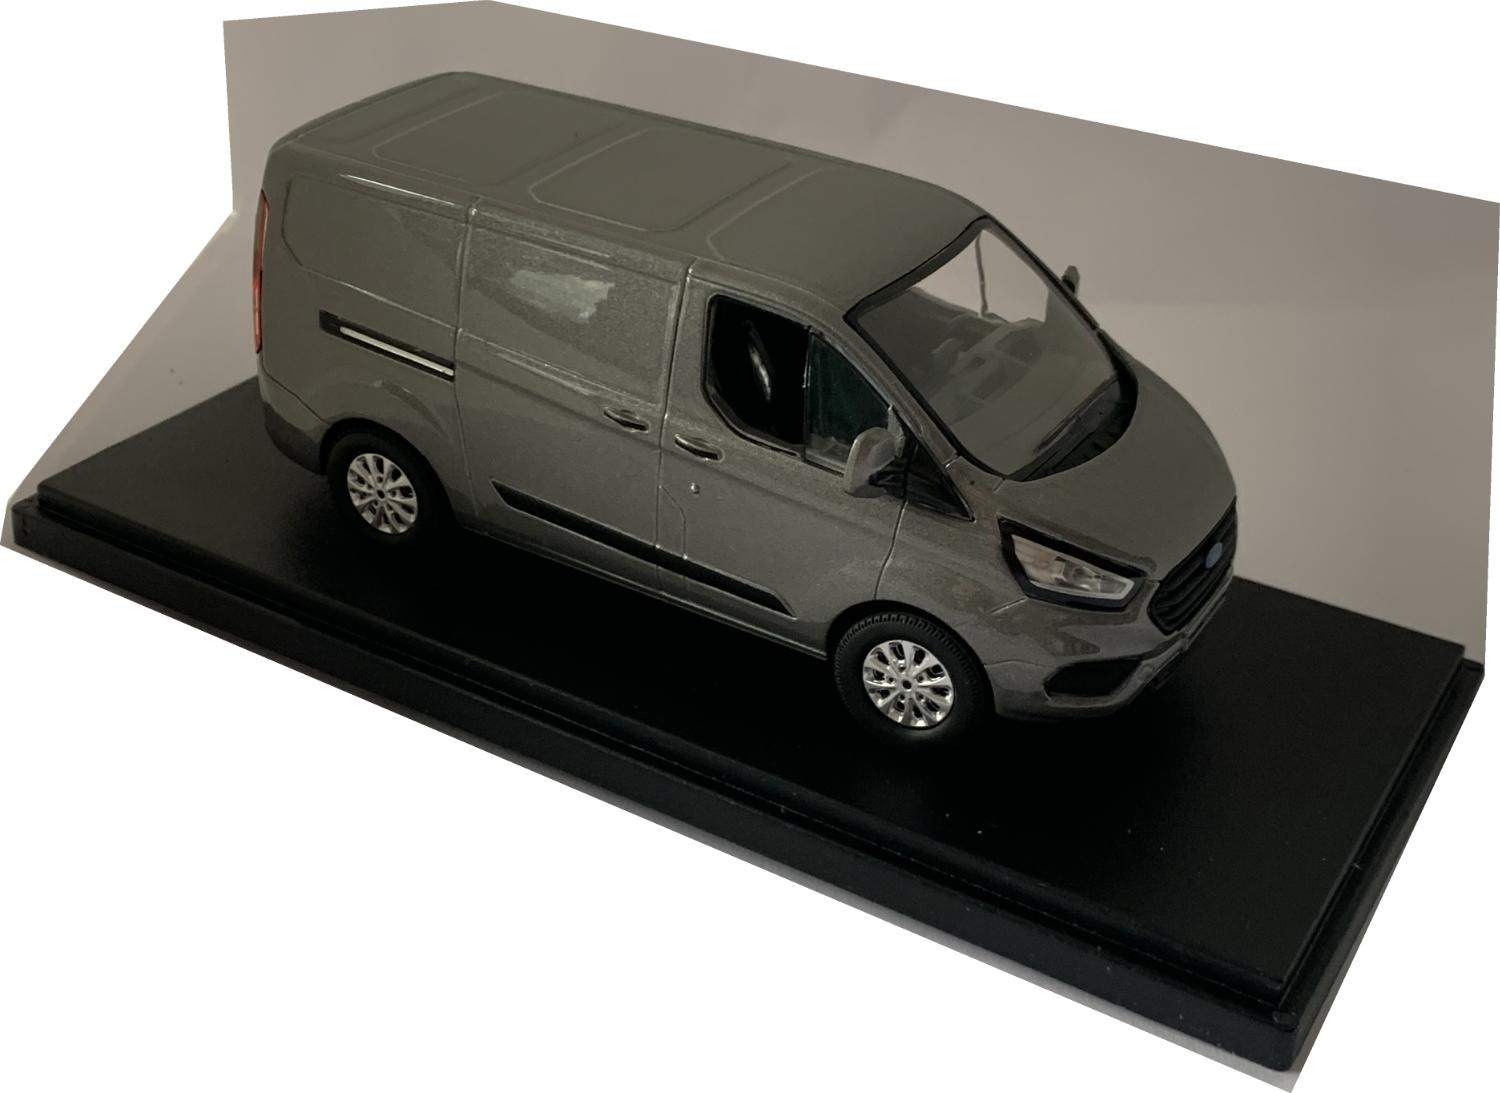 Ford Transit Custom V362 MCA 2018 in magnetic grey 1:43 scale  van model from Greenlight, limited edition